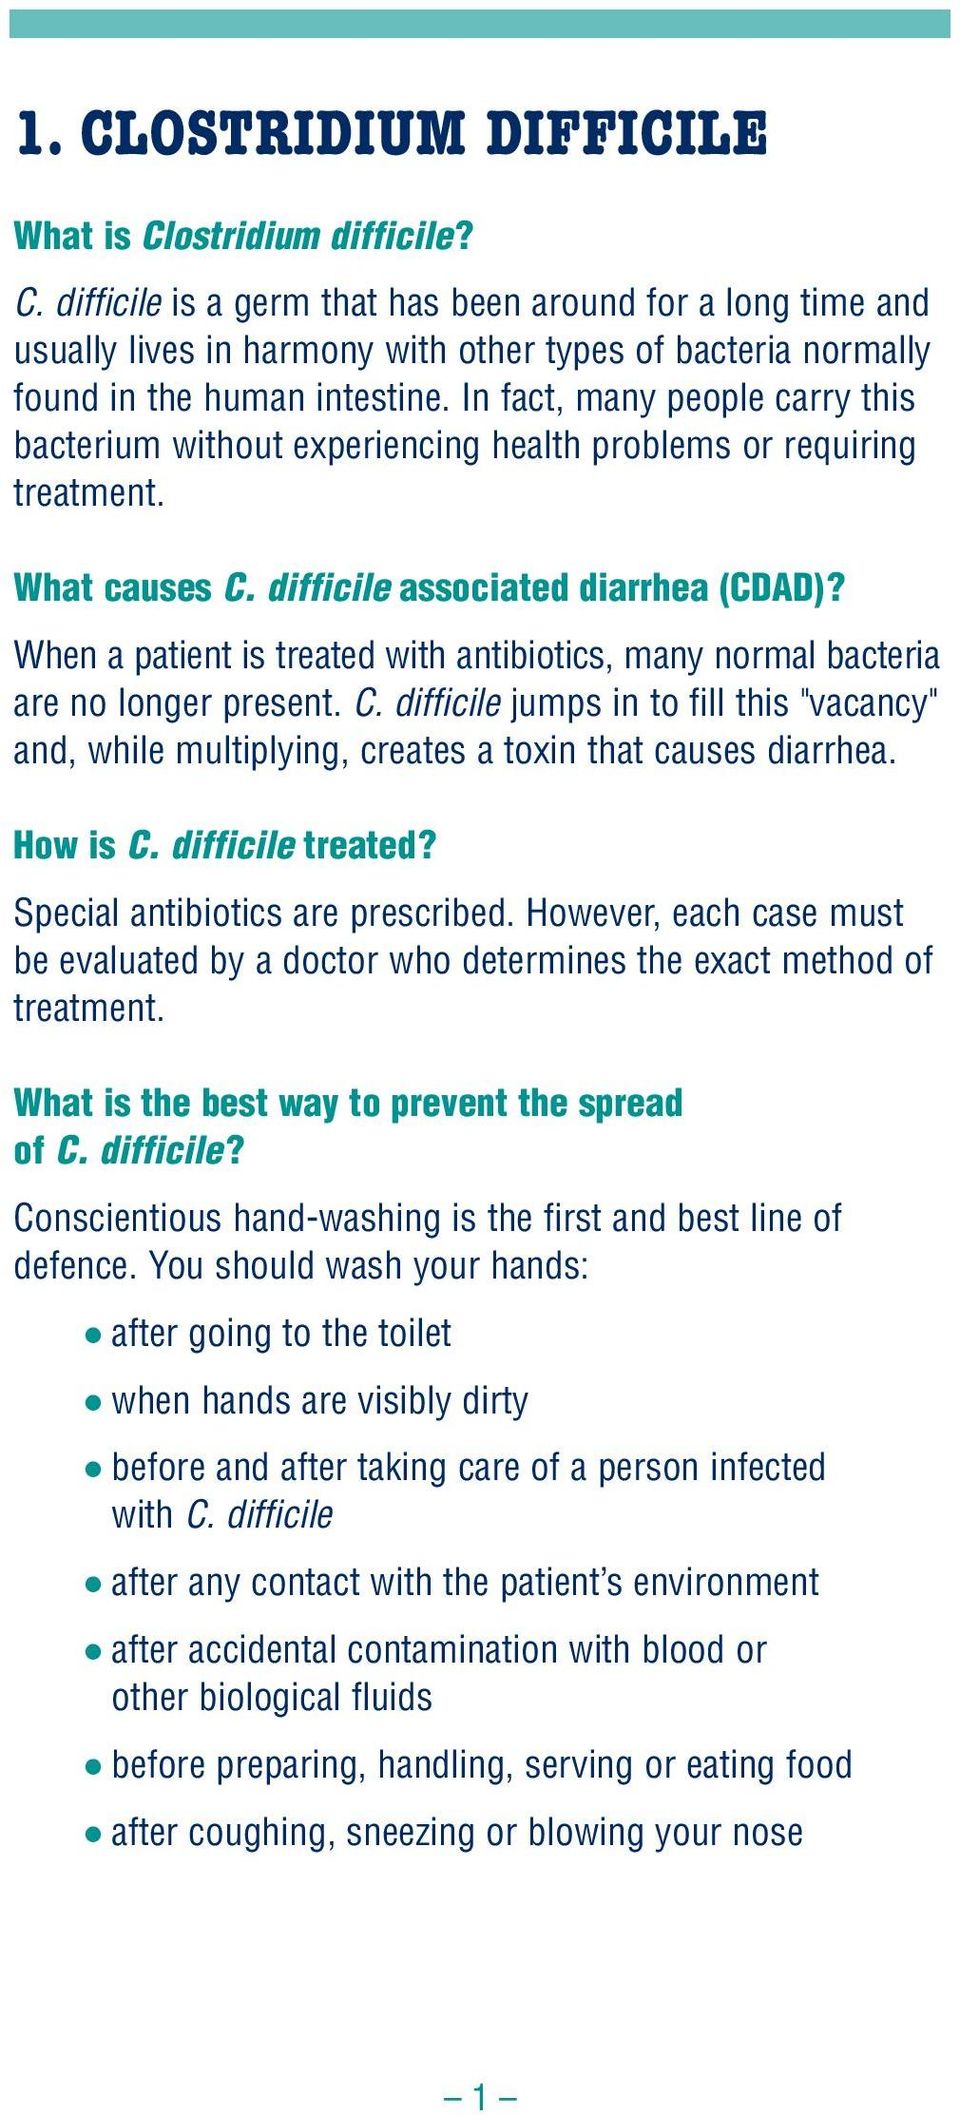 When a patient is treated with antibiotics, many normal bacteria are no longer present. C. difficile jumps in to fill this "vacancy" and, while multiplying, creates a toxin that causes diarrhea.